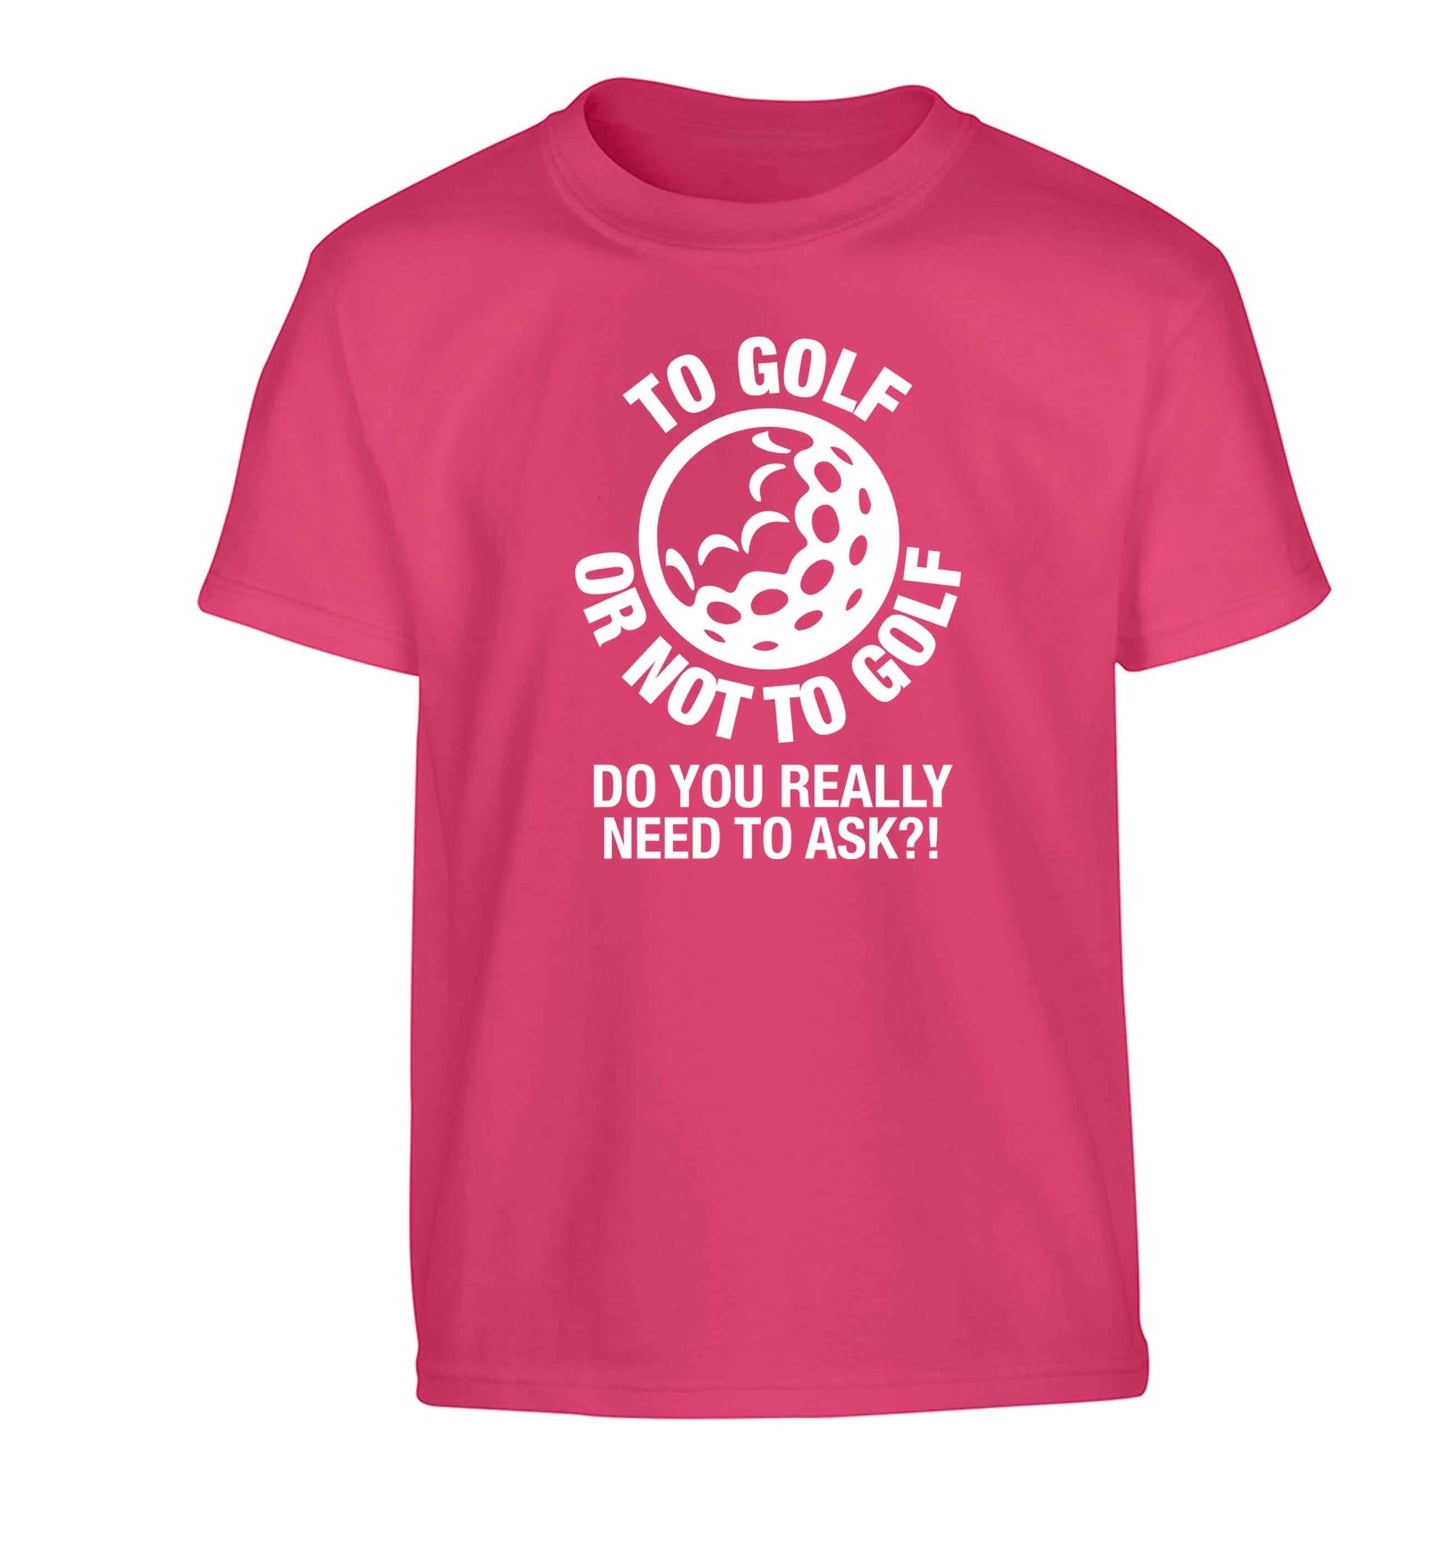 To golf or not to golf Do you really need to ask?! Children's pink Tshirt 12-13 Years